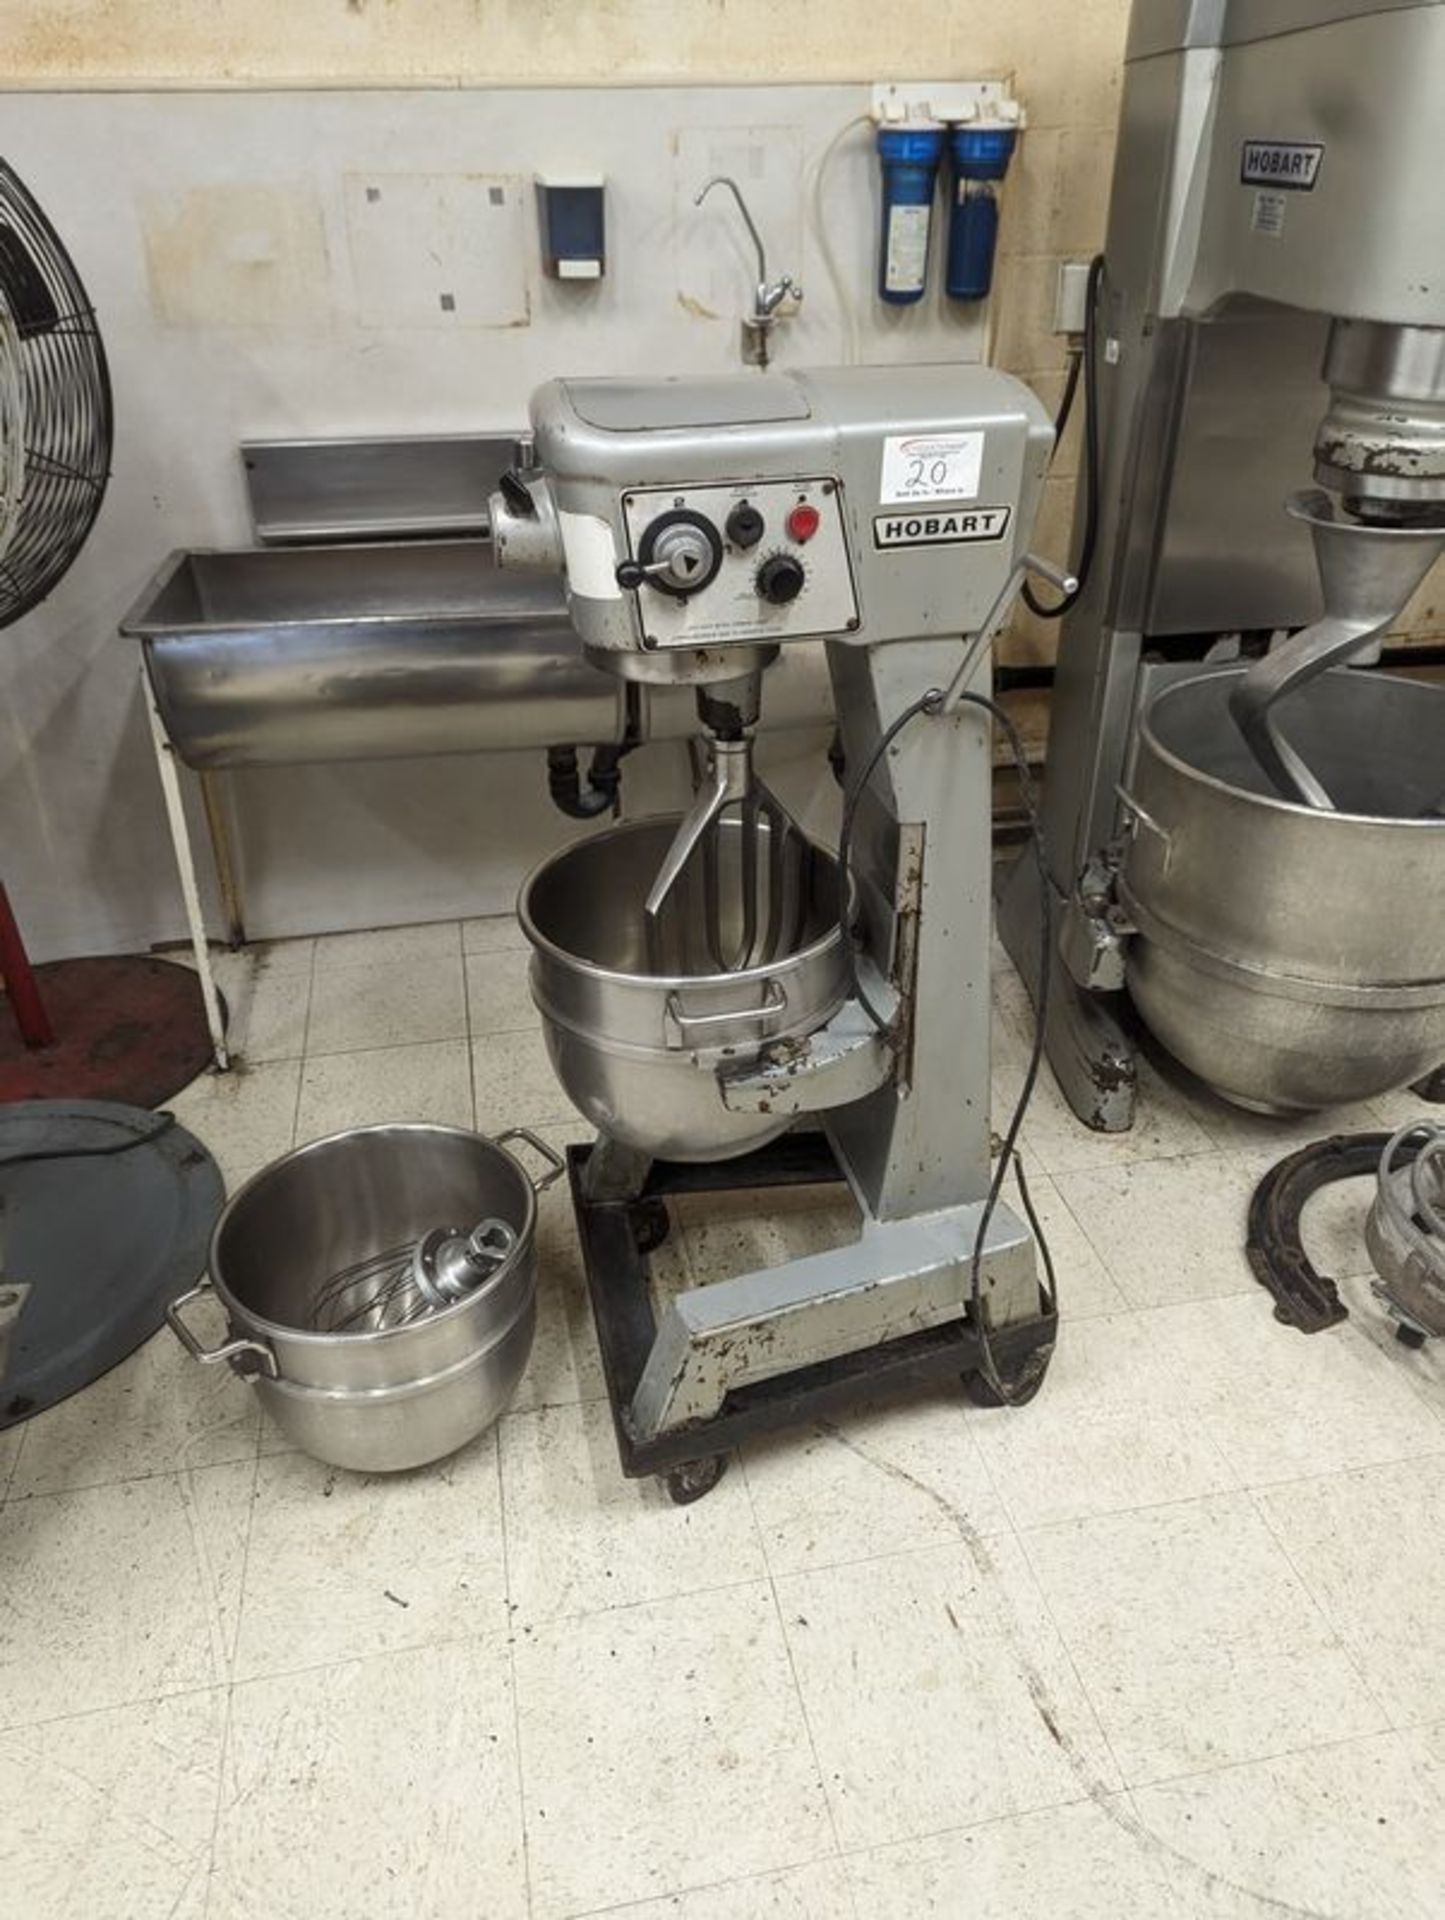 30 Quart Hobart Mixer with 2 Bowls, Paddle and Whip